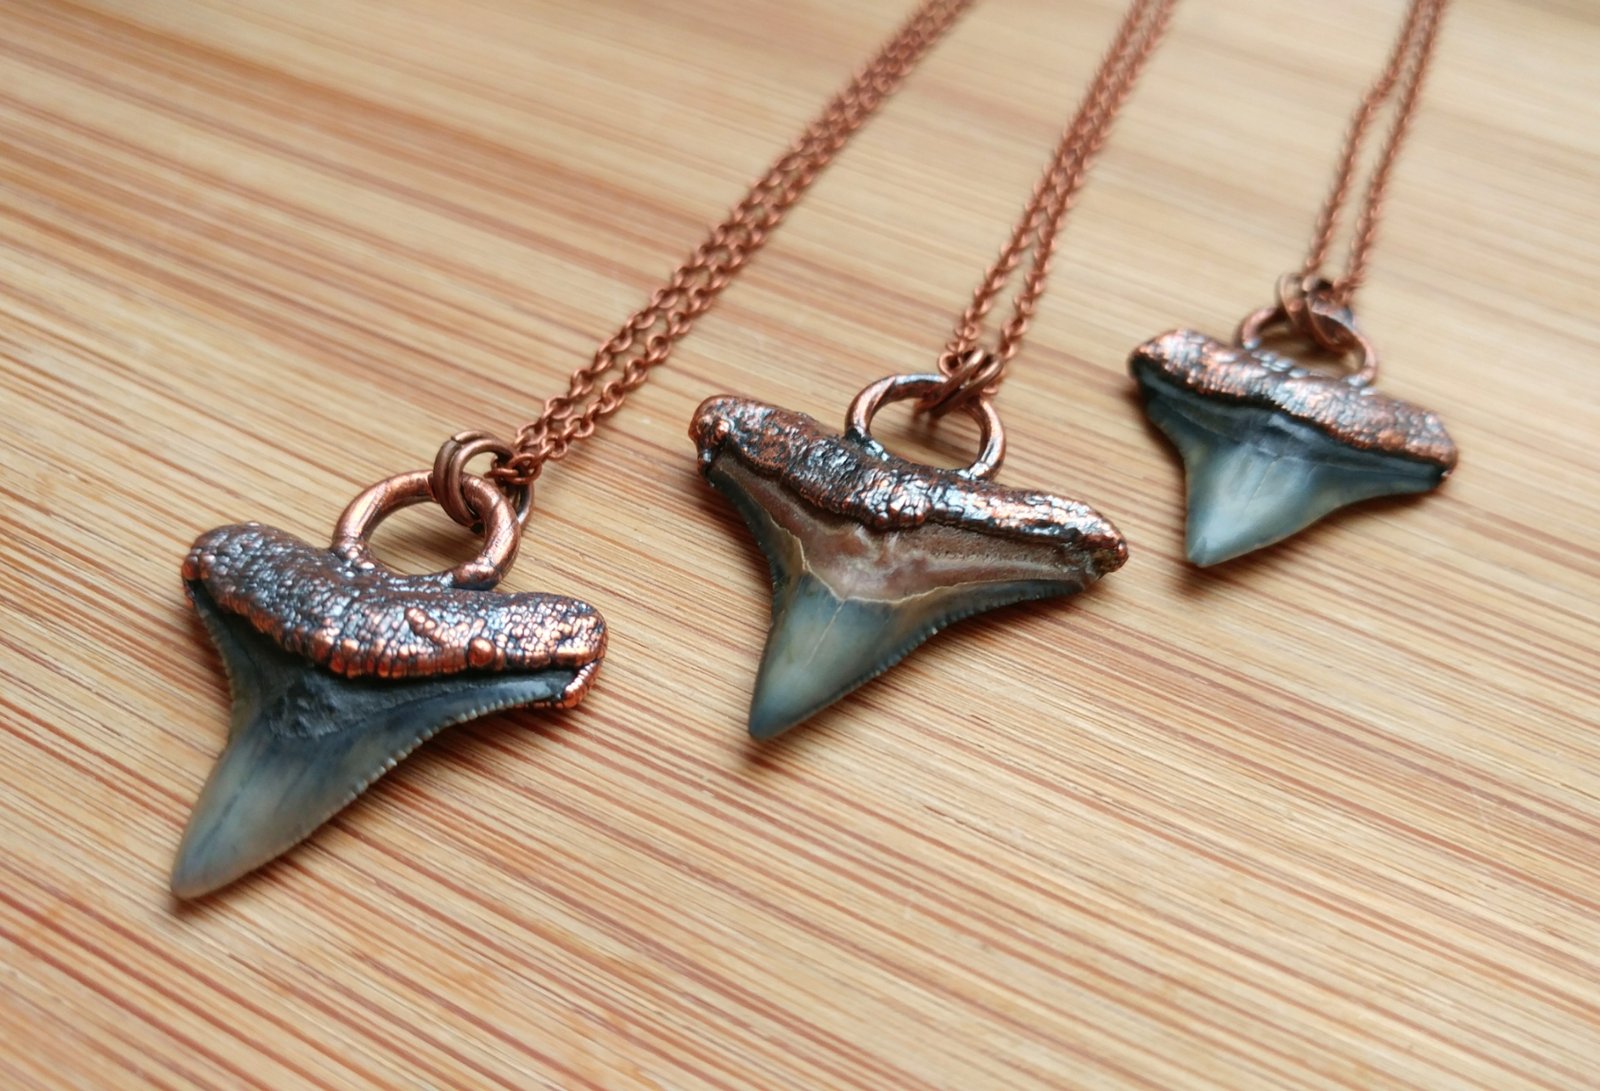 READY TO SHIP Shark Tooth Necklace - 925 Sterling Silver FJD$